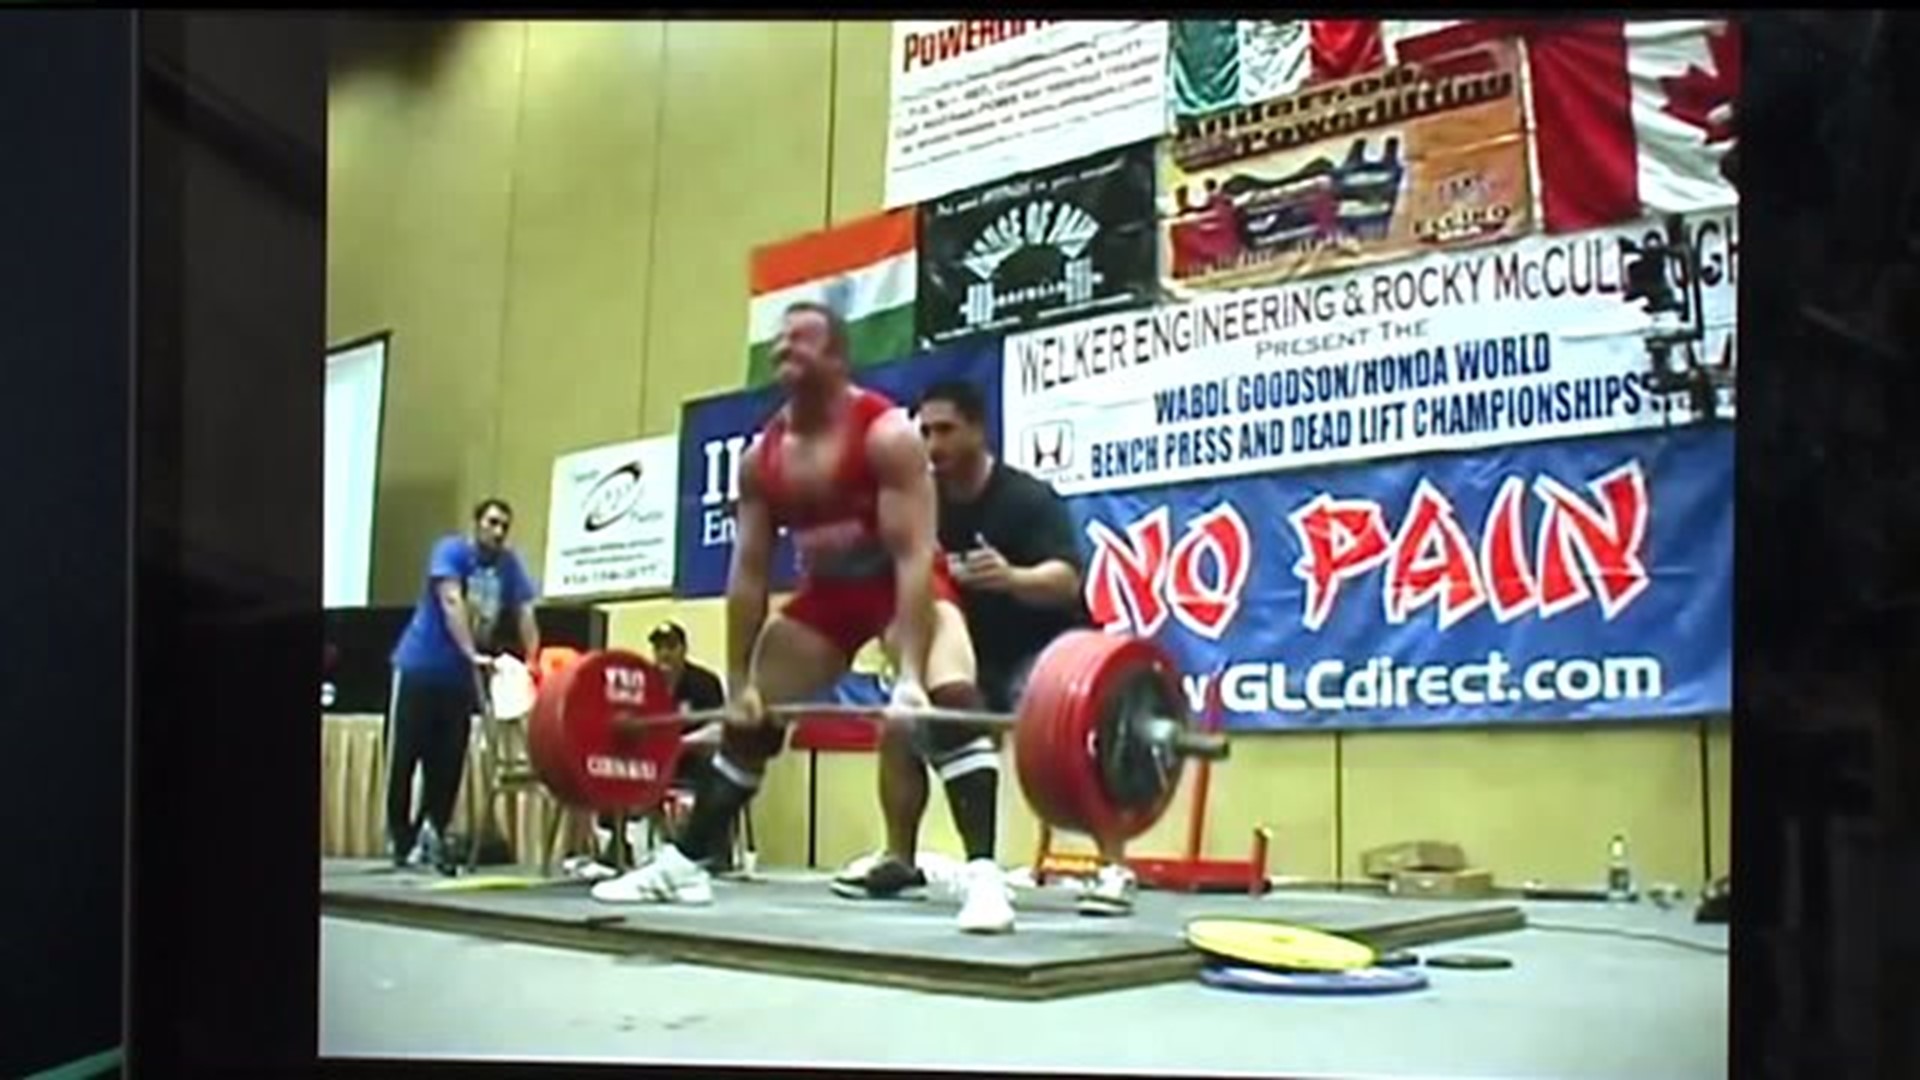 Let`s Move QC: Power lifting